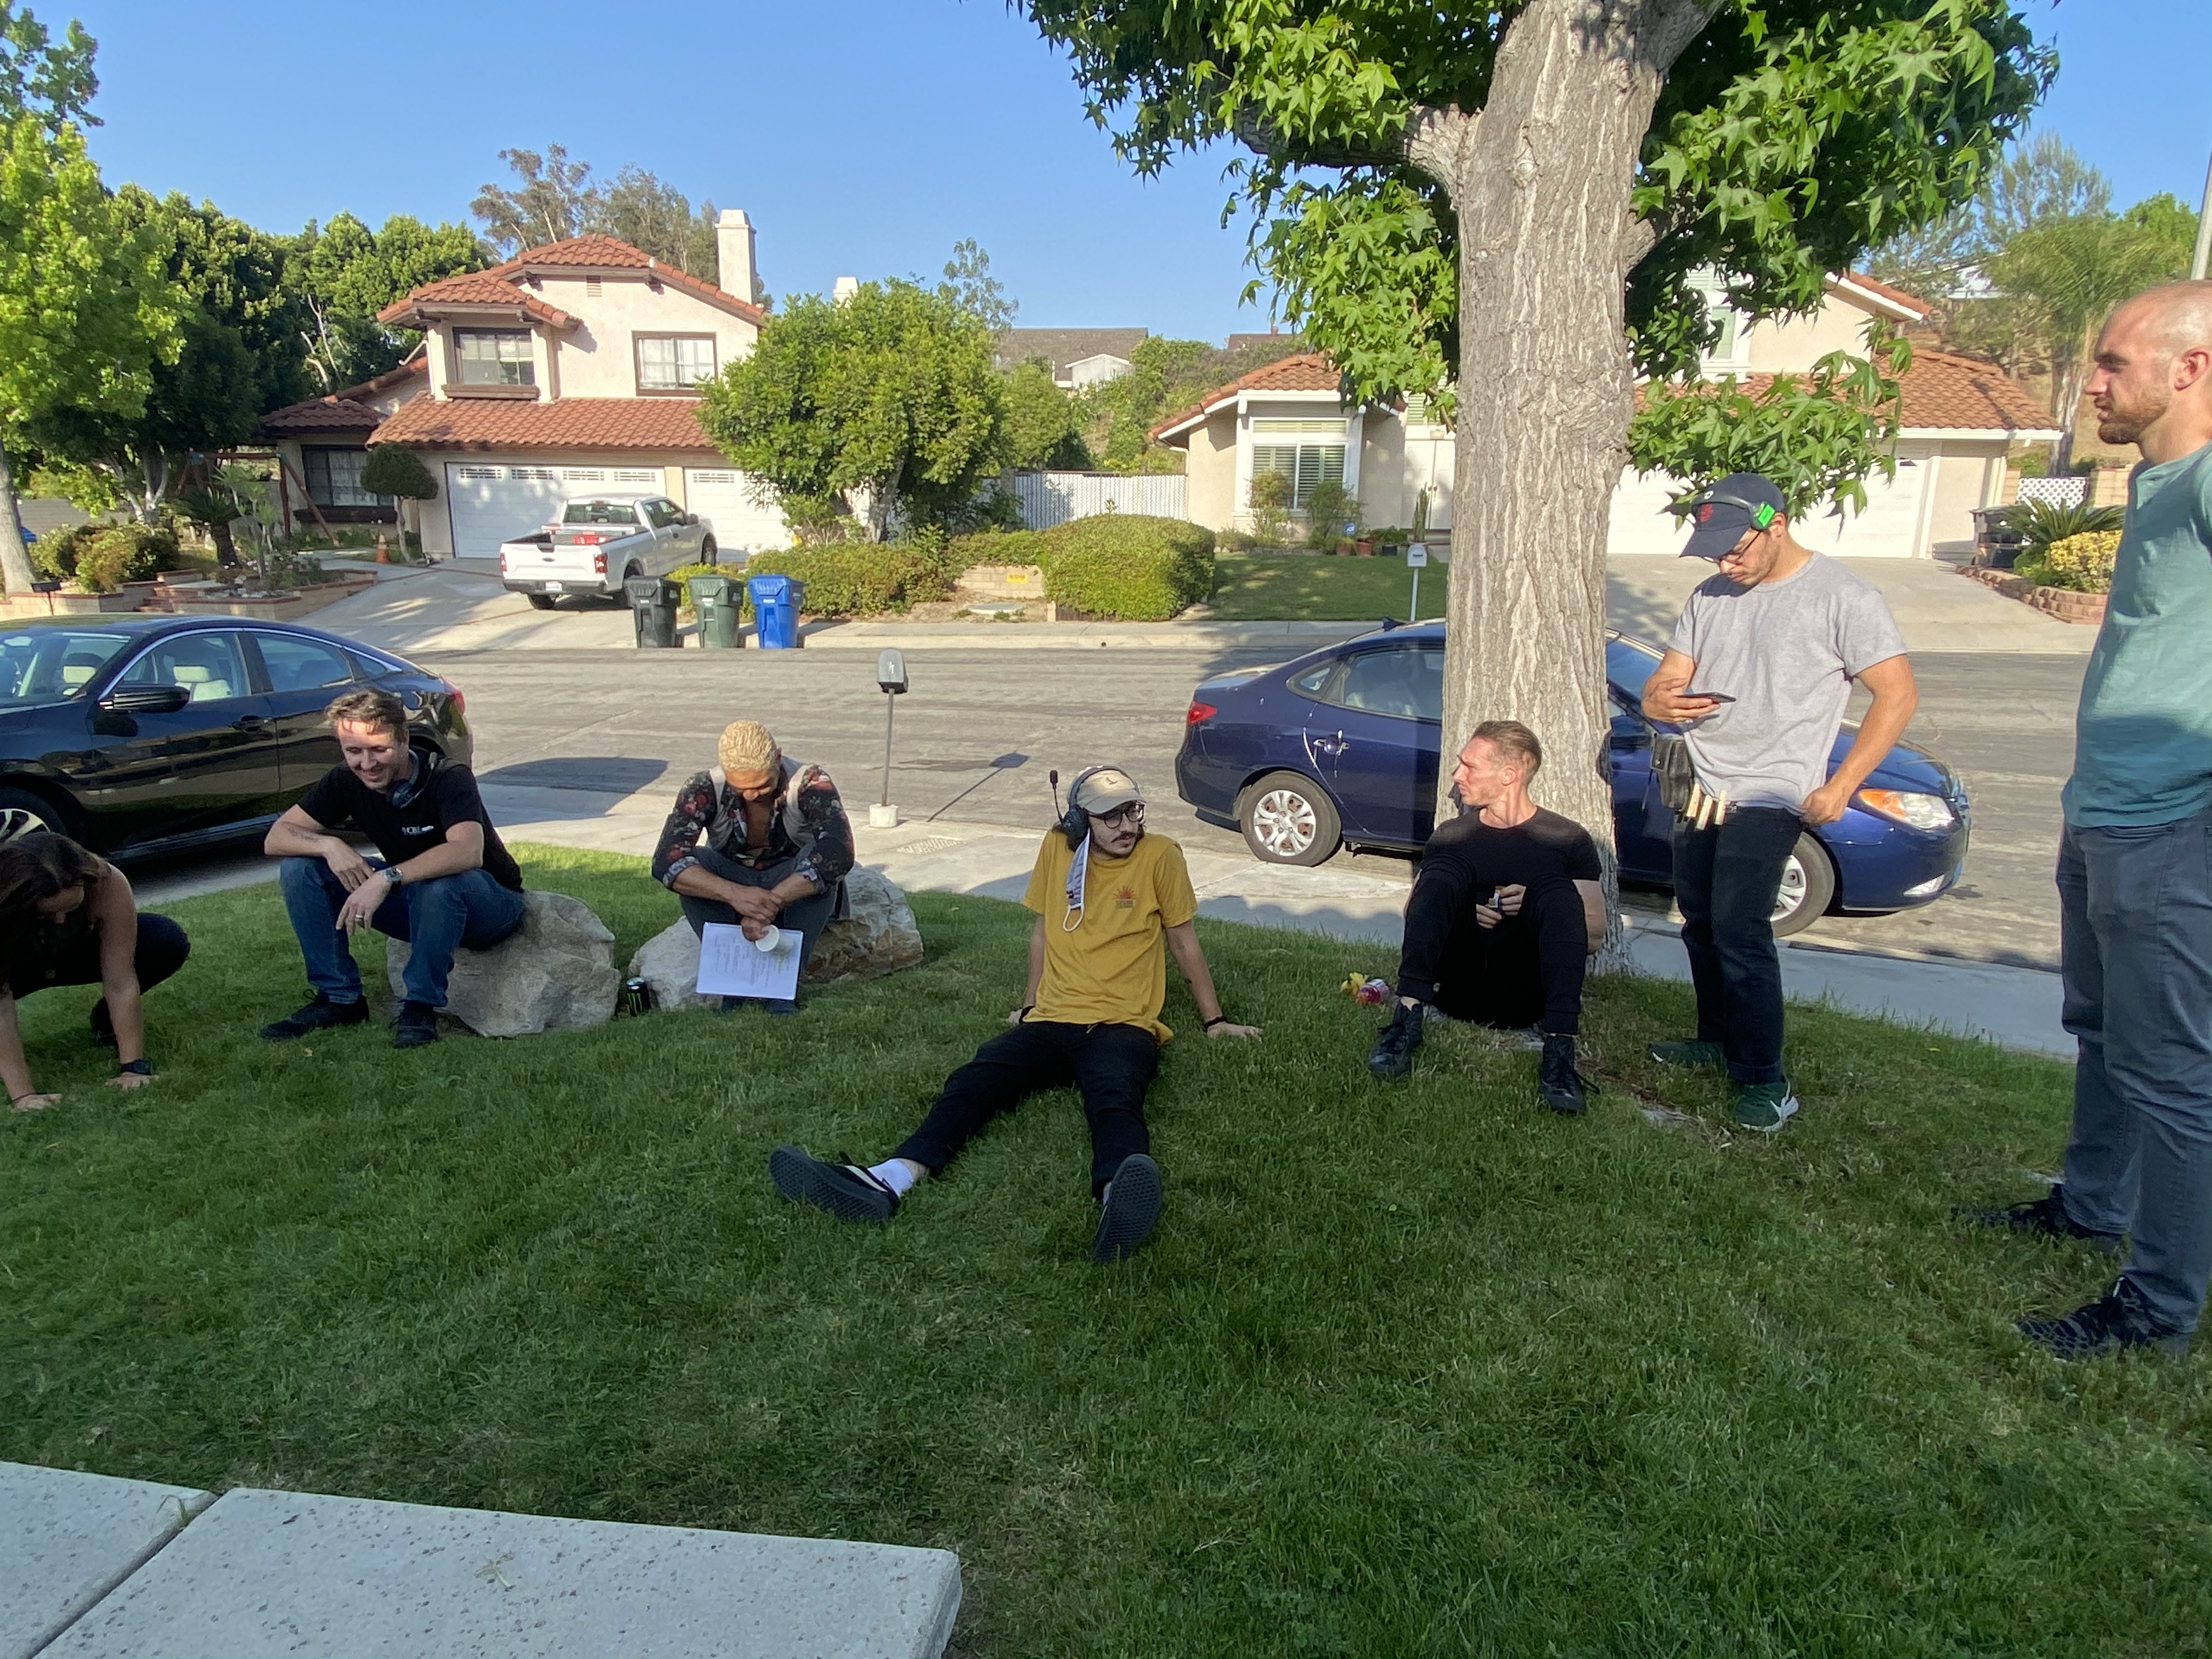 Some Fallen Drive team members lounge on the front lawn